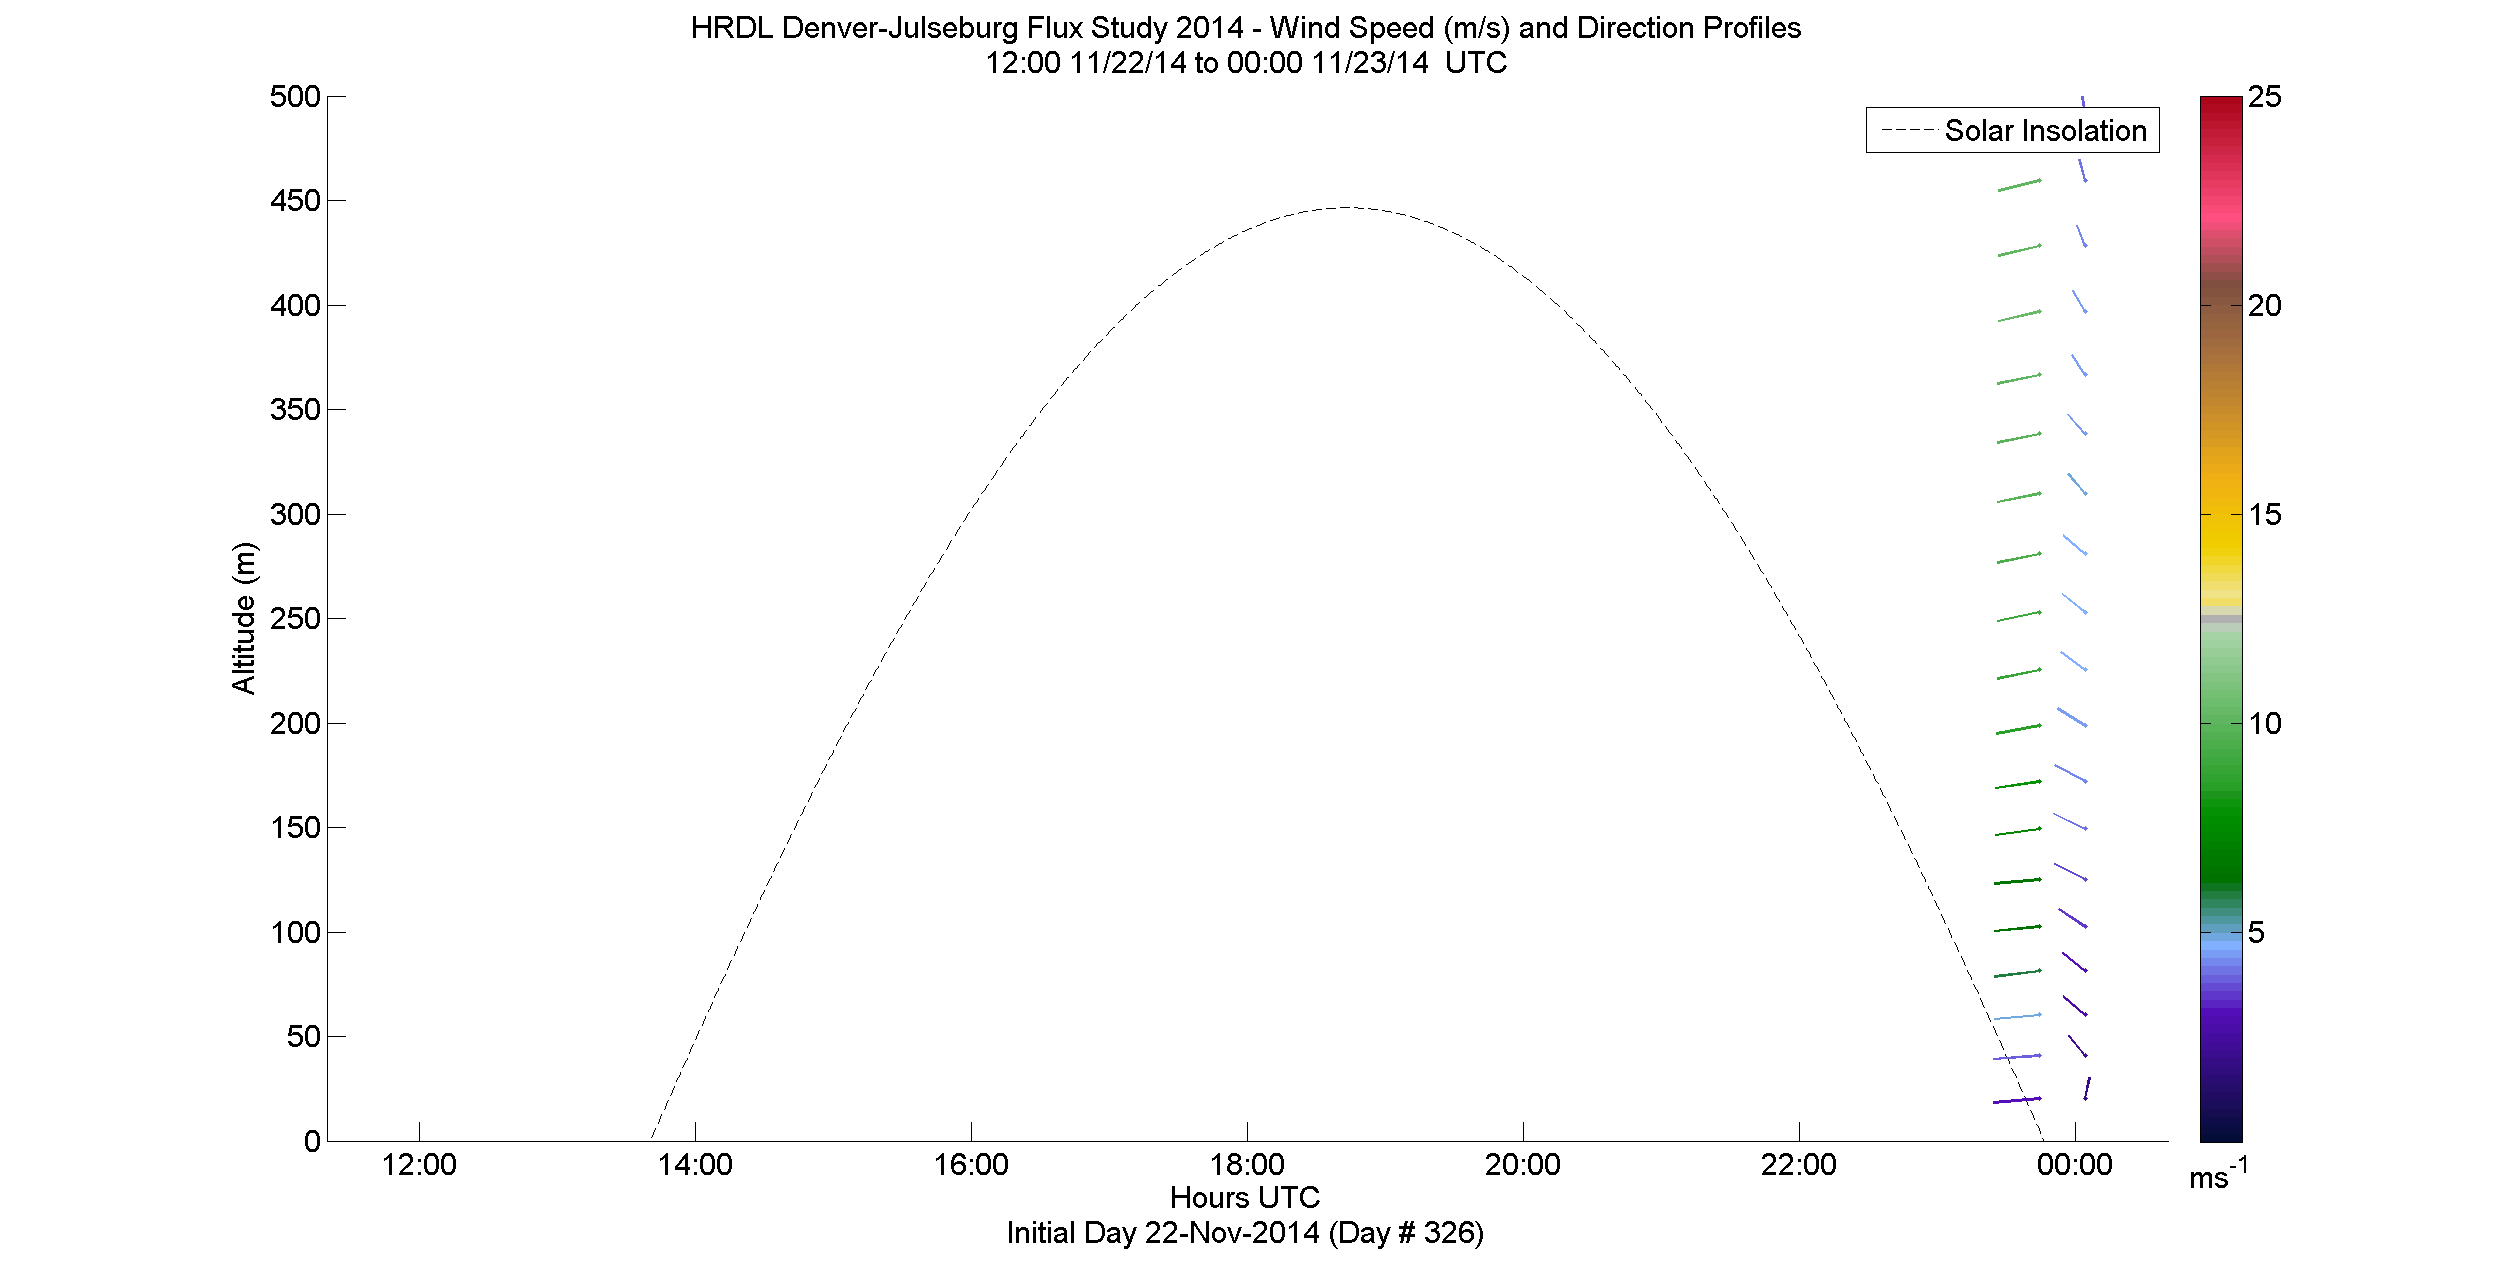 HRDL speed and direction profile - November 22 pm